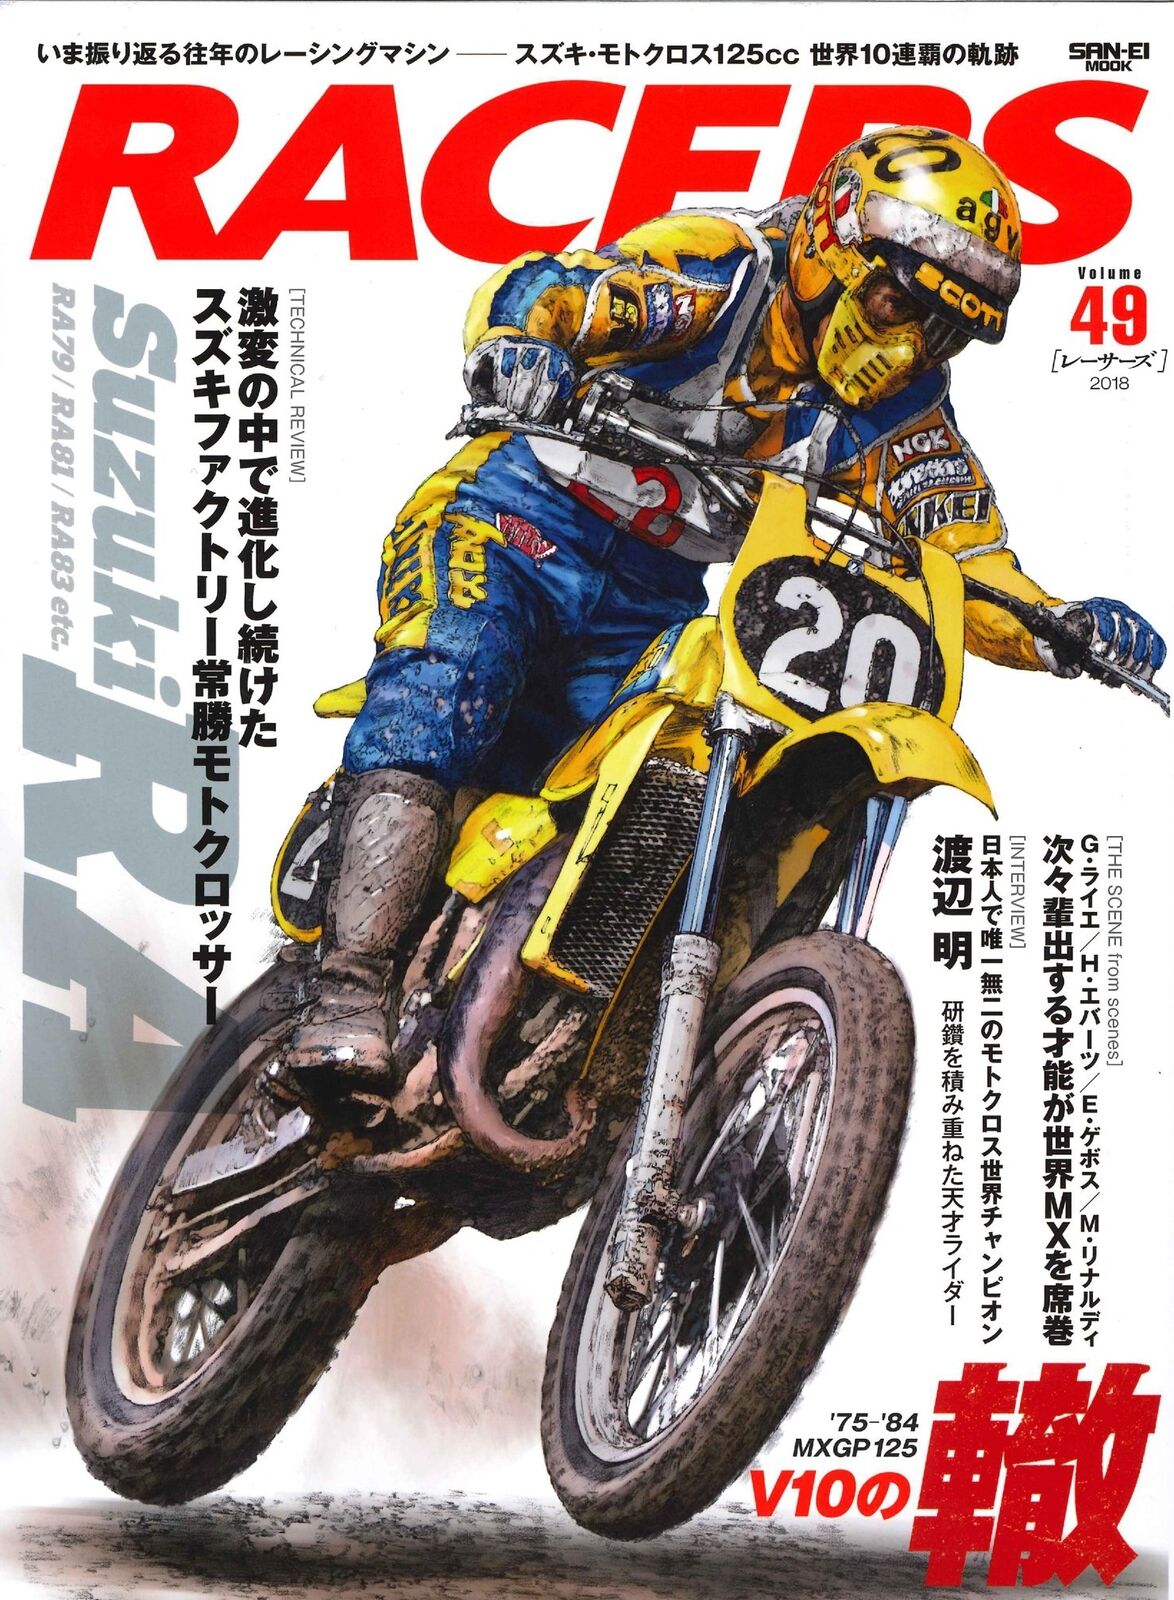 RACERS vol.49 Suzuki RA Magazine Book with Tracking number New from Japan F/S